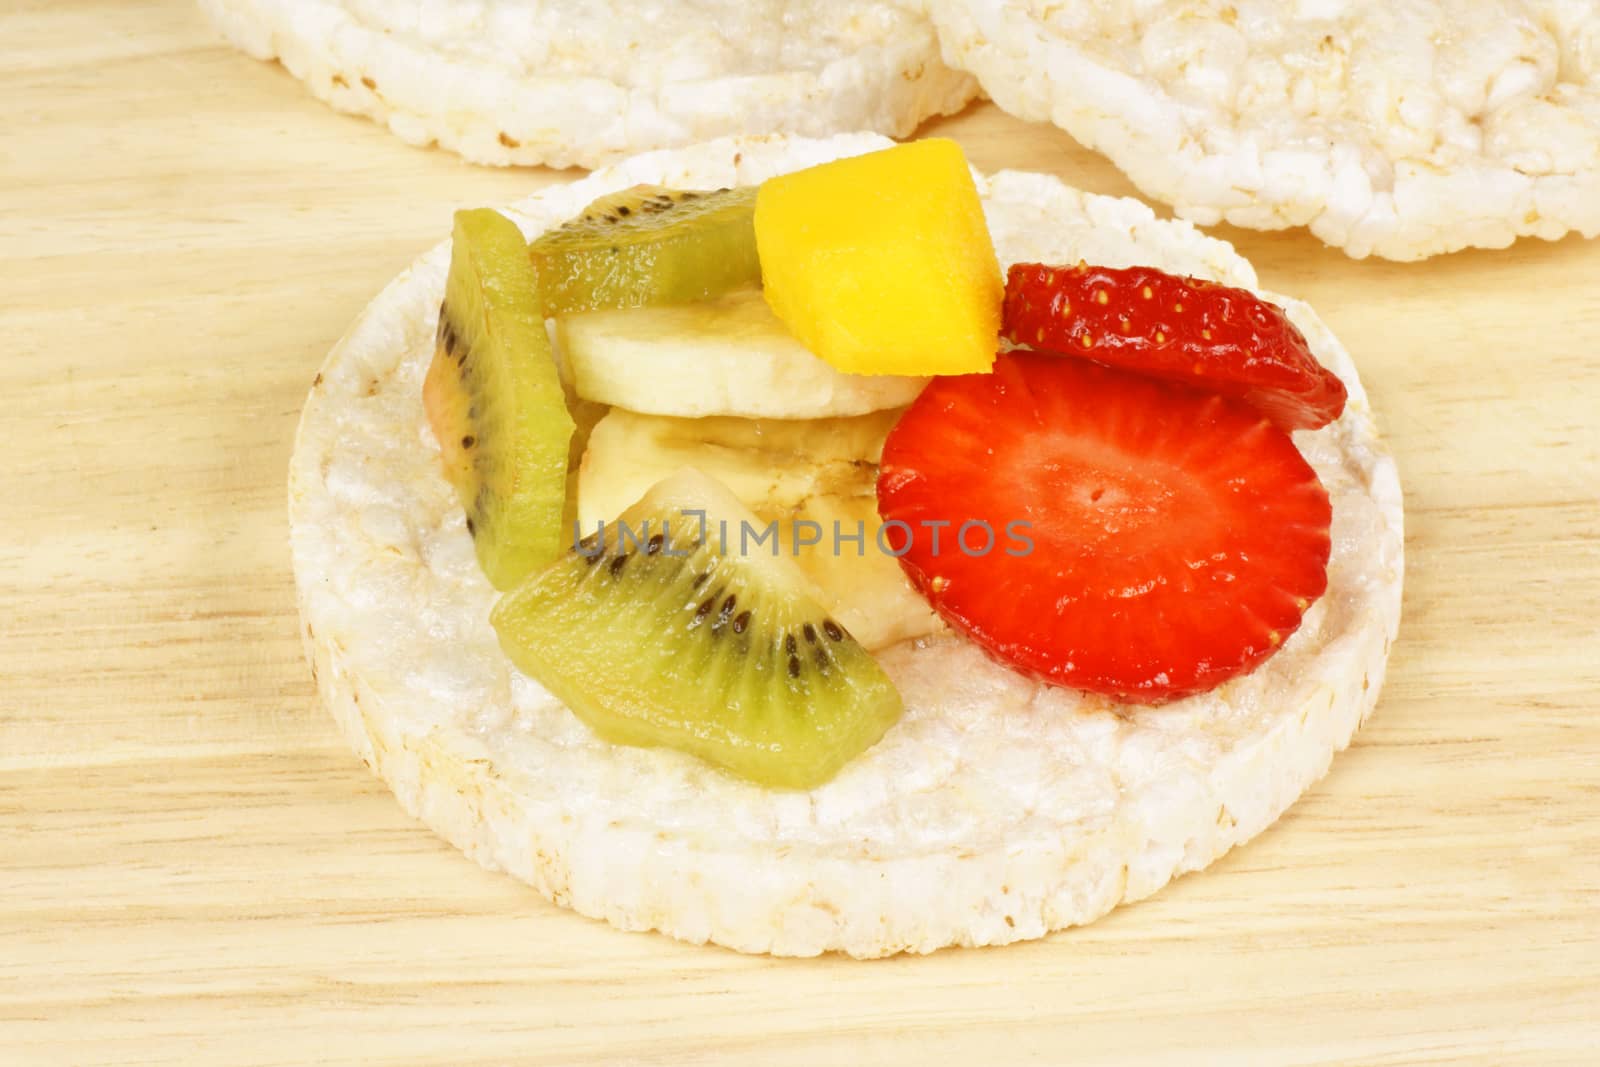 Rice cake with fresh fruit over a wooden background